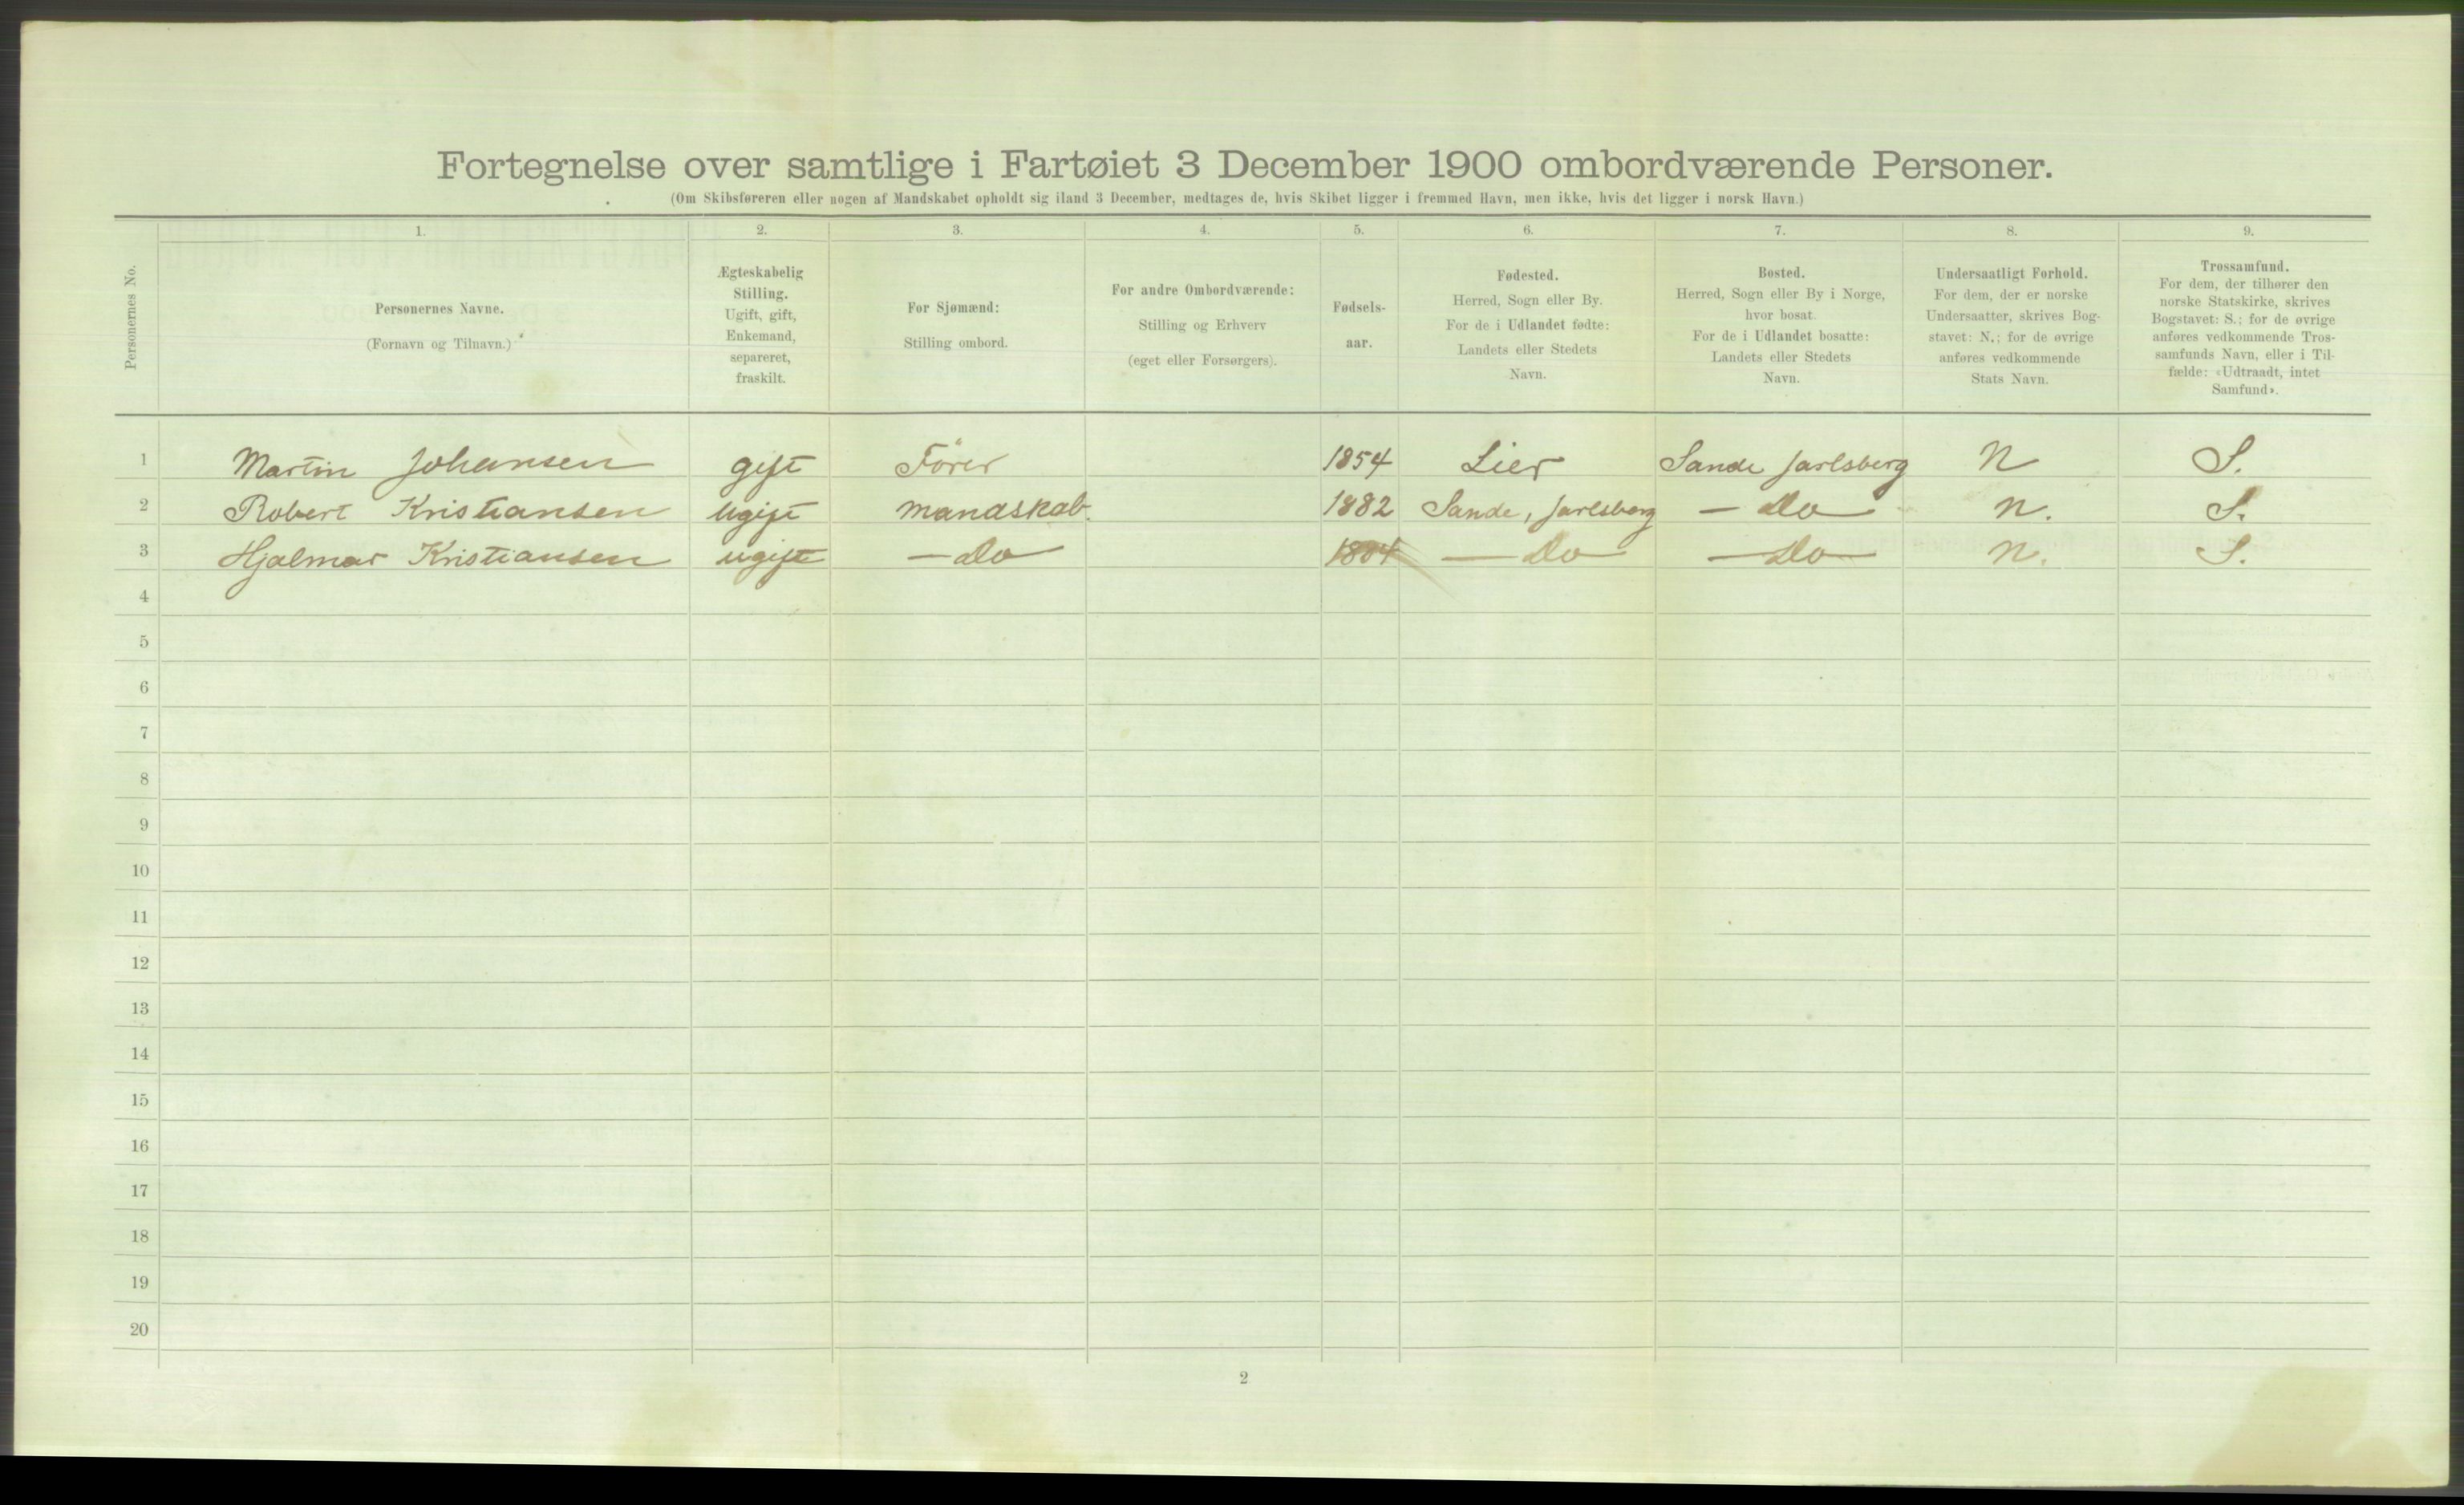 RA, 1900 Census - ship lists from ships in Norwegian harbours, harbours abroad and at sea, 1900, p. 468